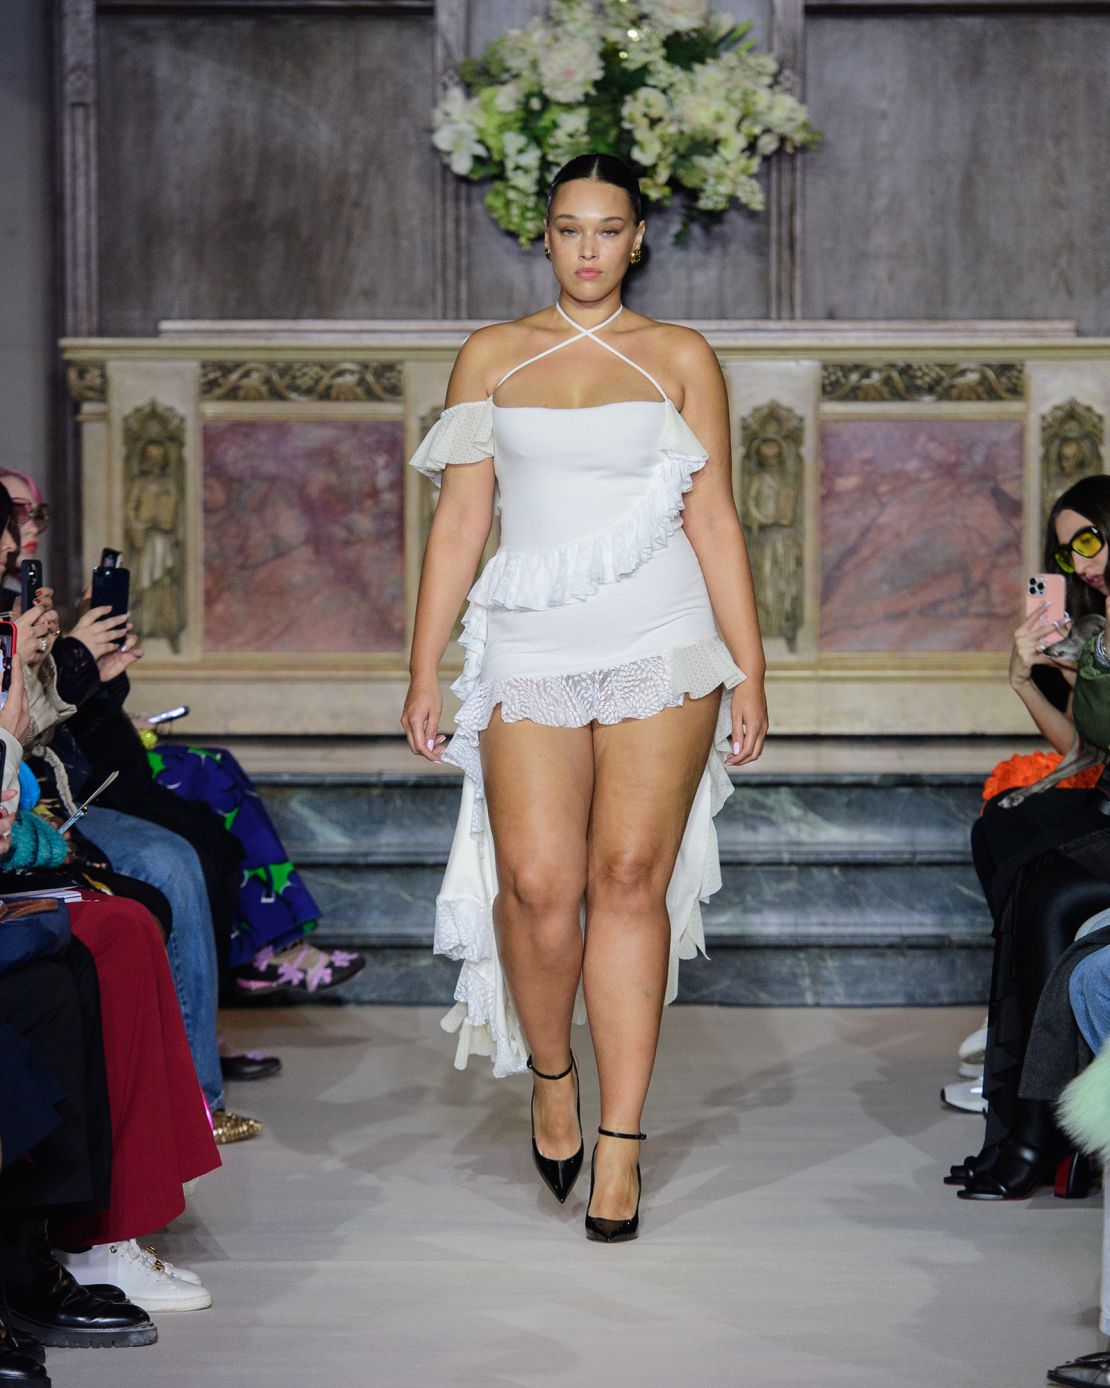 Wedding bells were ringing at the Esther Manas show.